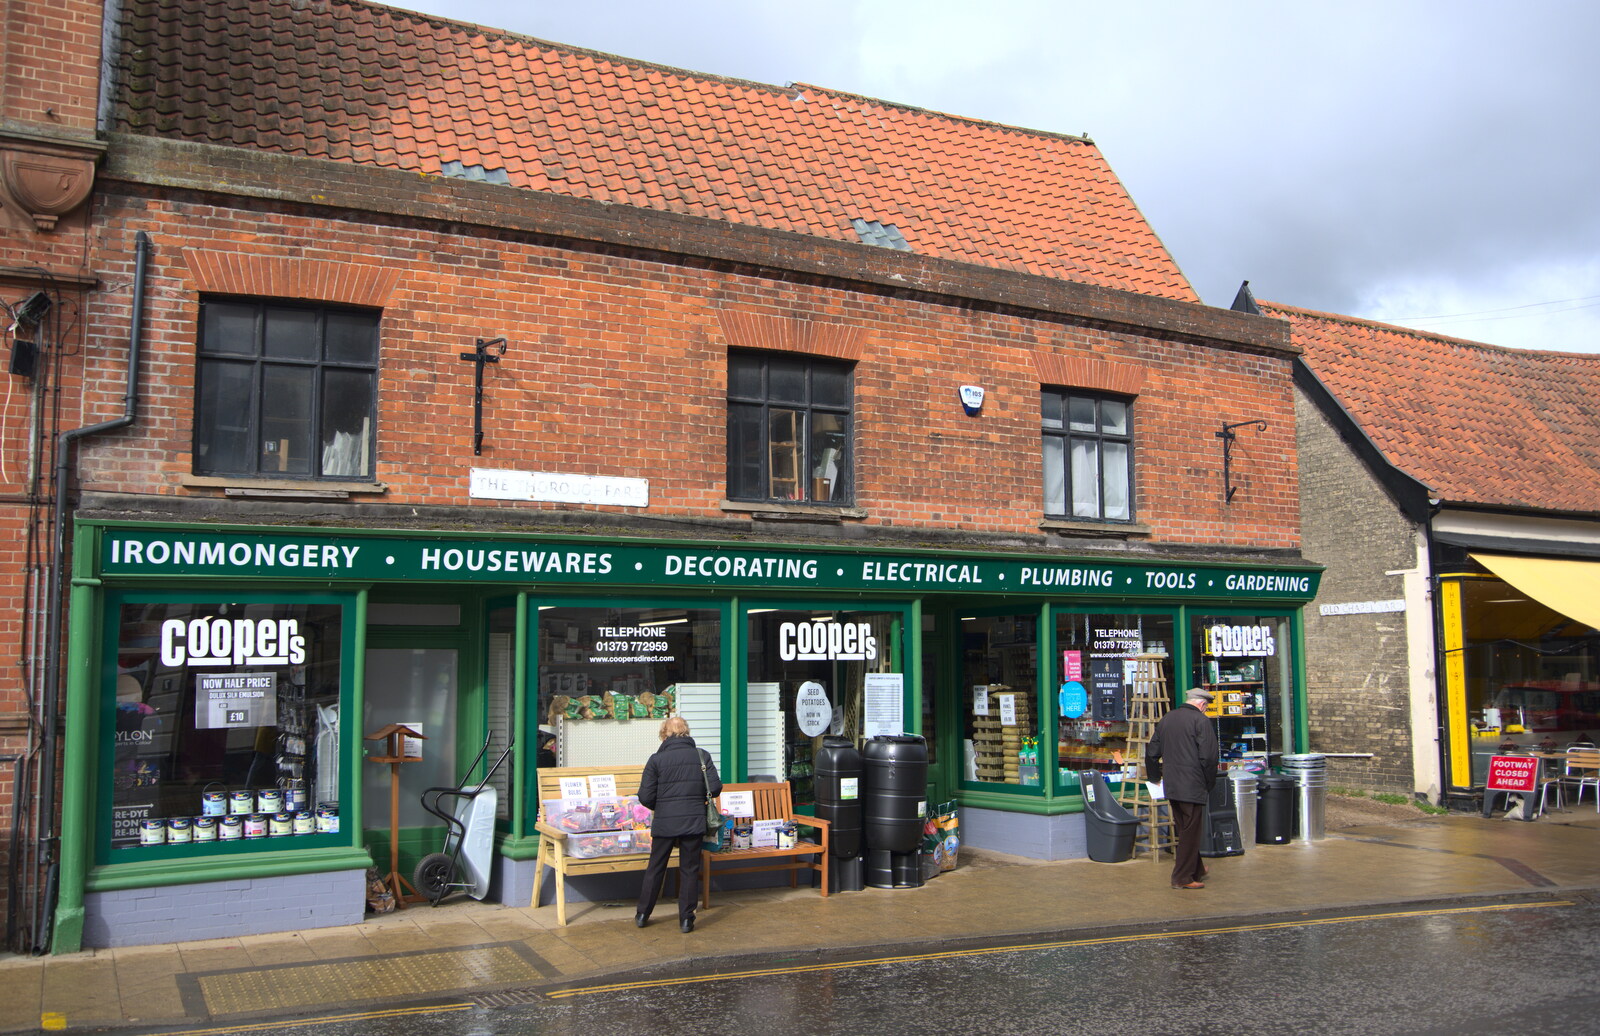 Lunch in Harleston, Norfolk - 1st March 2023: The old-school Cooper's ironmongers